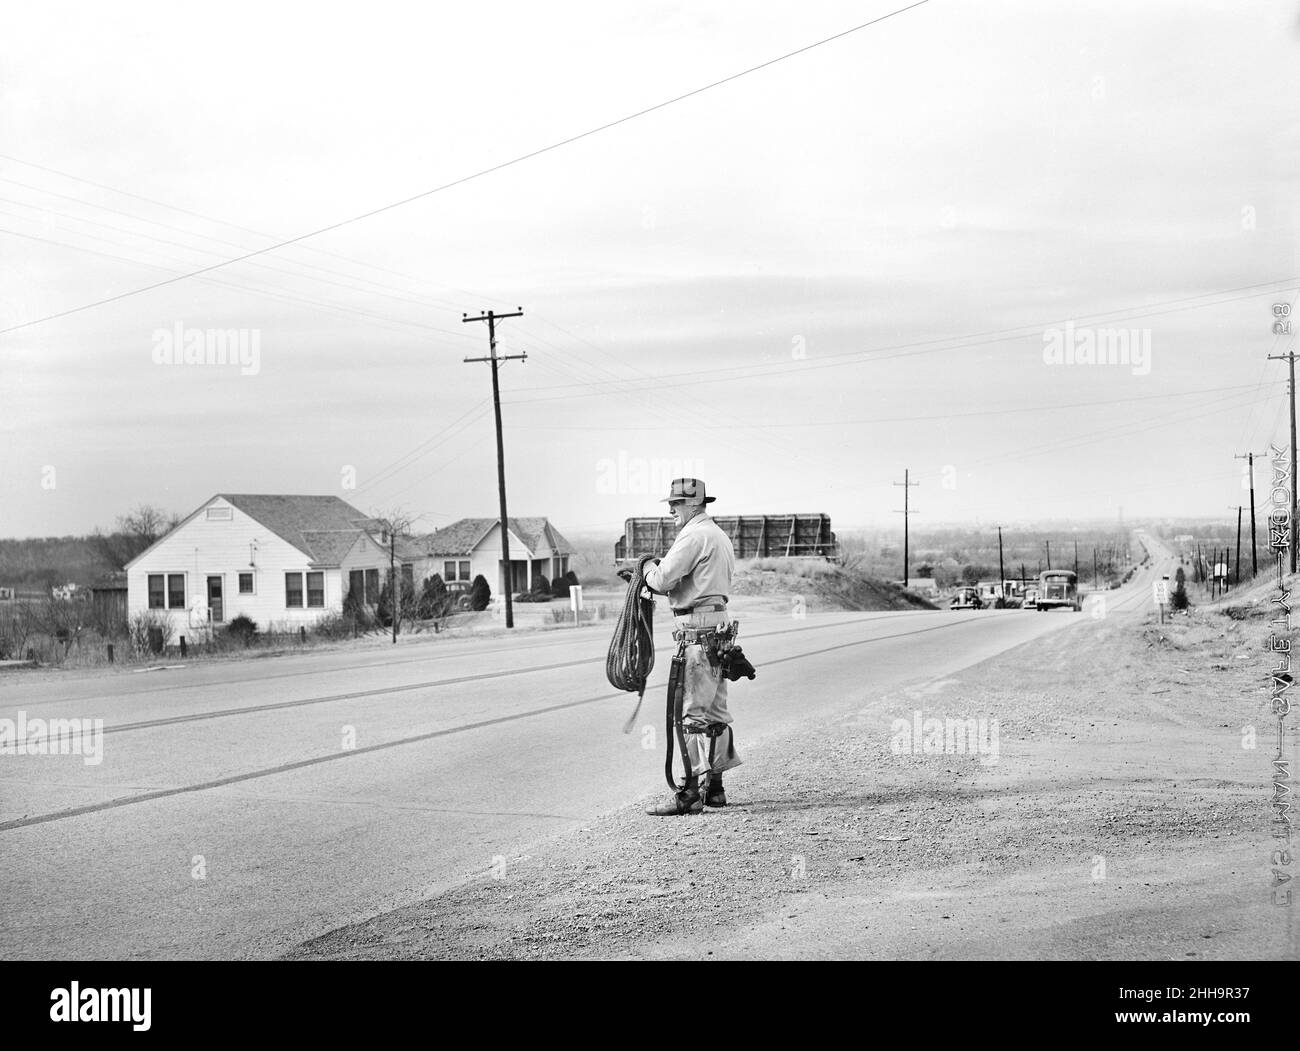 Telephone Lineman, U.S. Highway 80 between Fort Worth and Dallas, Texas, USA, Arthur Rothstein, U.S. Office of War Information/U.S. Farm Security Administration, January 1942 Stock Photo